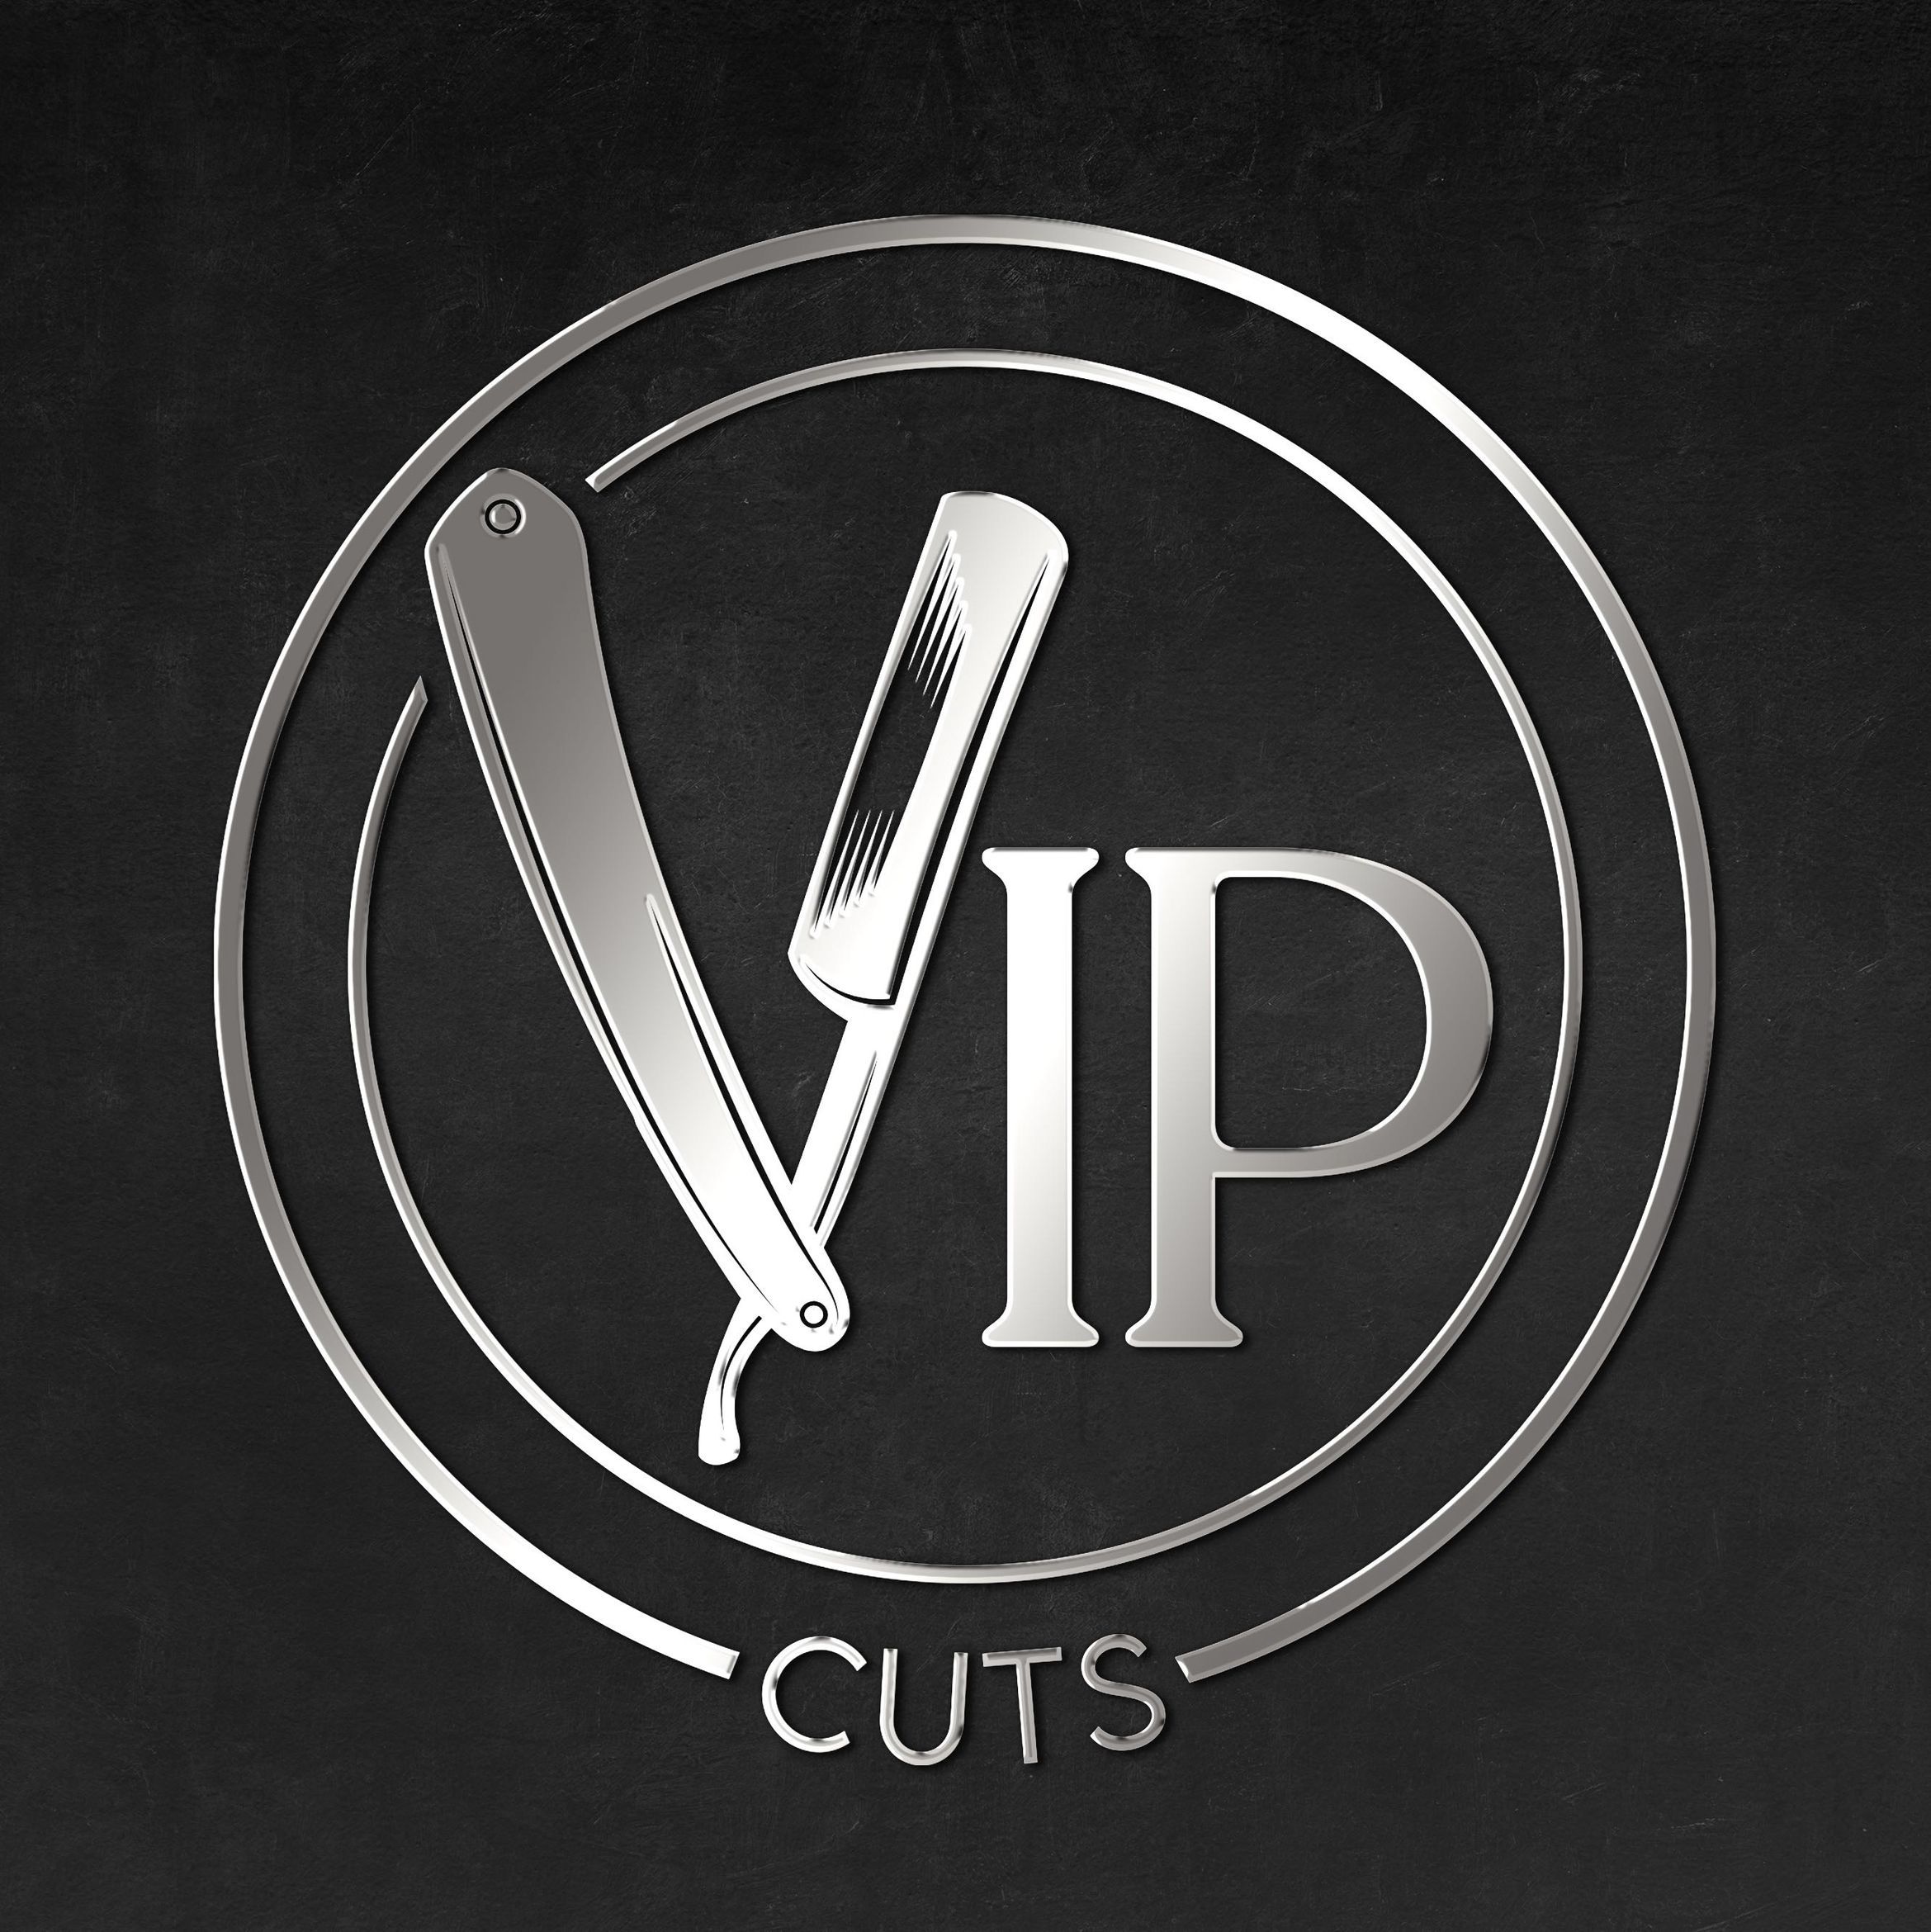 VIP Cuts Barbershp, 12108 north 56th st, Suite A, Temple Terrace, 33617